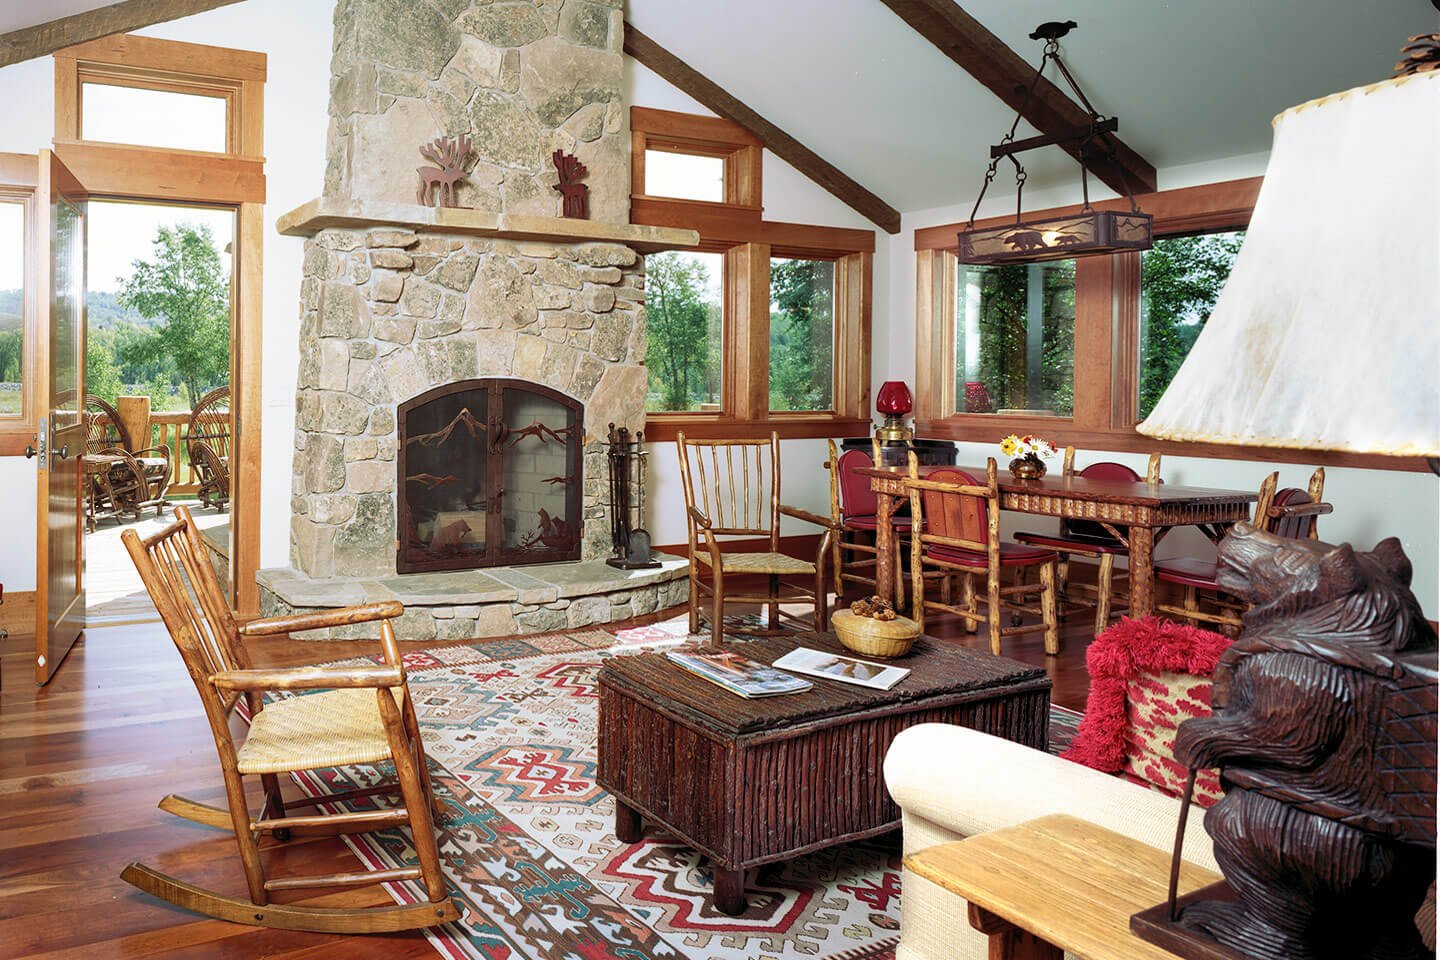 Living room in guest cabin with western style furniture